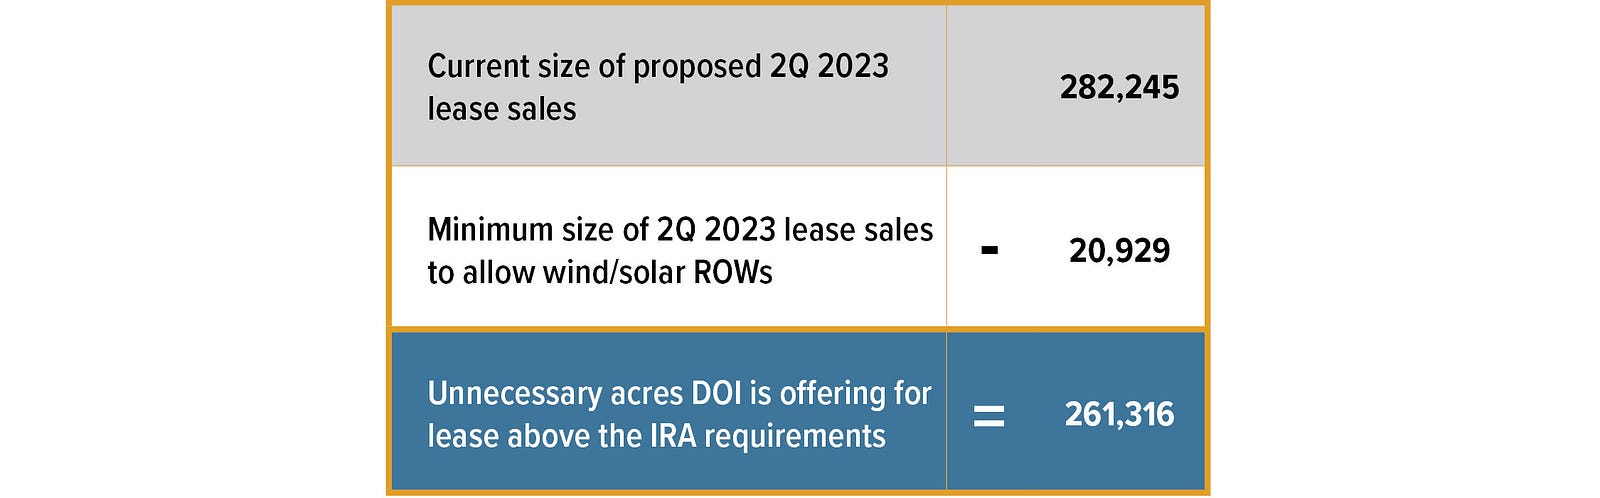 Current size of proposed 2Q 2023 lease sales 282,245 Minimum size of 2Q 2023 lease sales to allow wind/solar ROWs — 20,929 Unnecessary acres DOI is offering for lease above the IRA requirements = 261,316